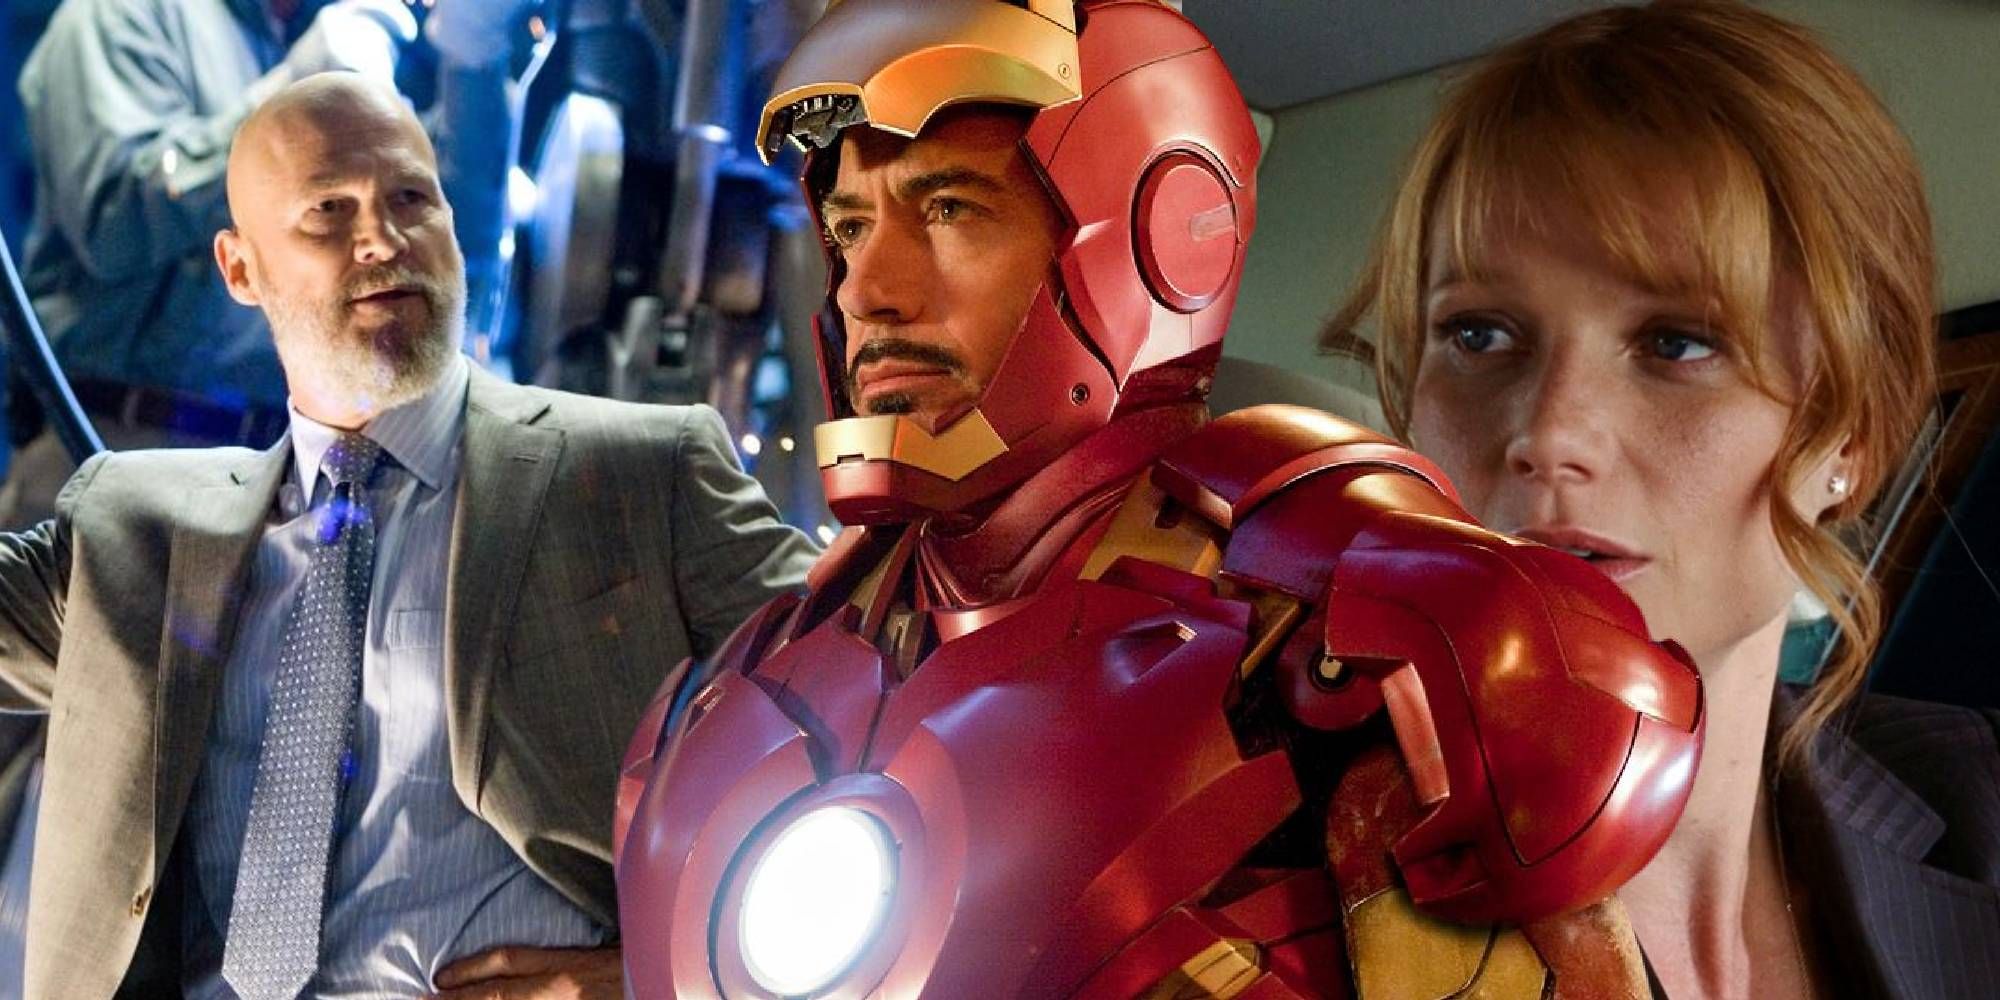 Stane, Stark and Potts in Iron Man